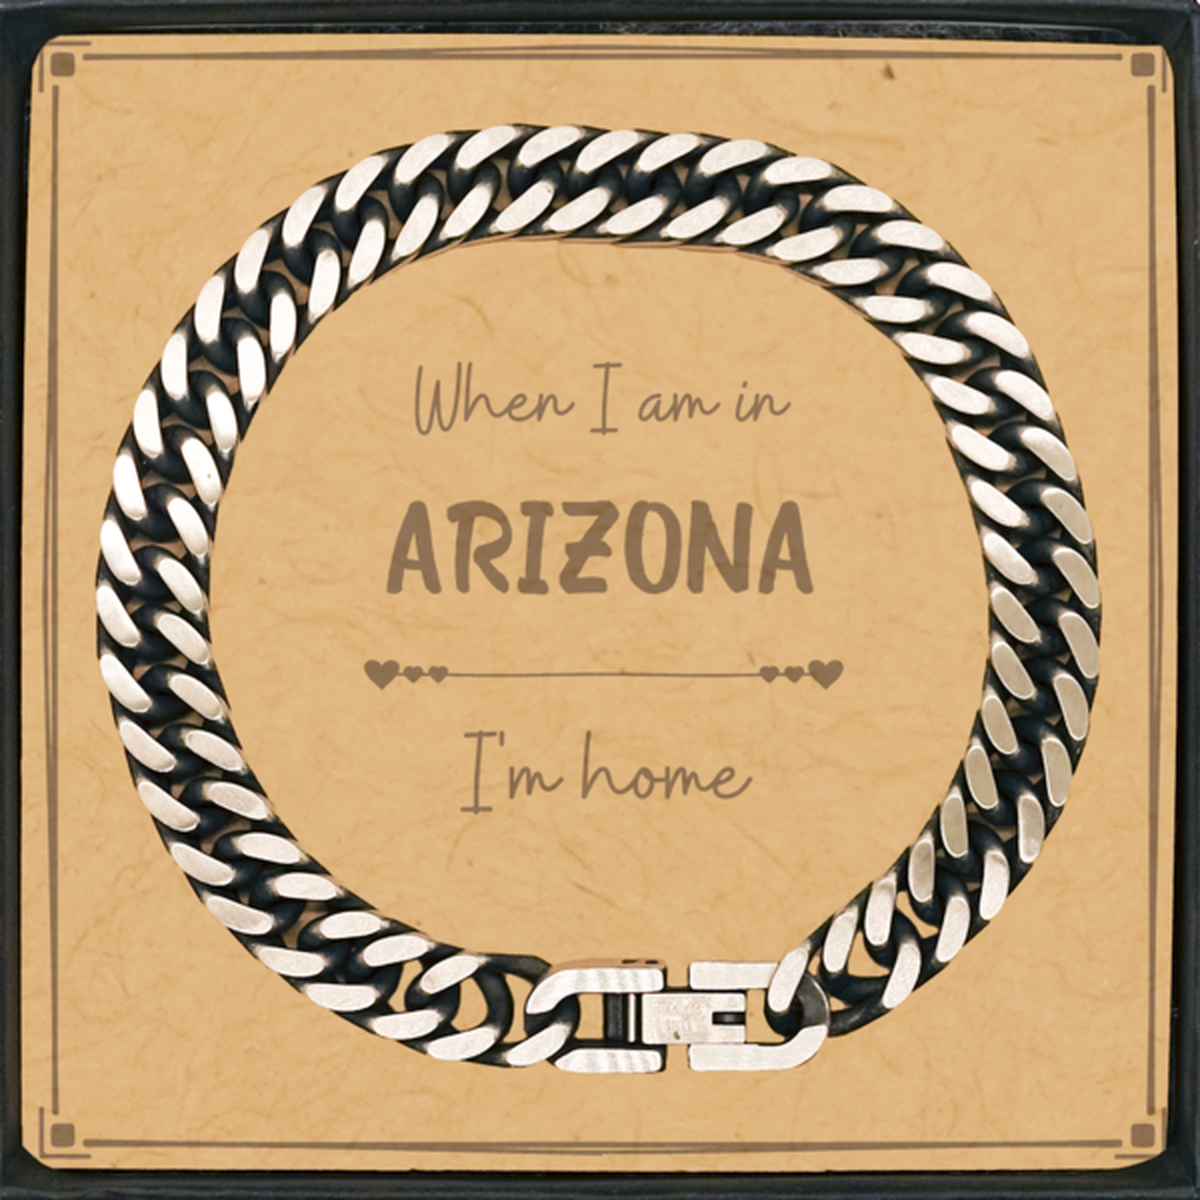 When I am in Arizona I'm home Cuban Link Chain Bracelet, Message Card Gifts For Arizona, State Arizona Birthday Gifts for Friends Coworker